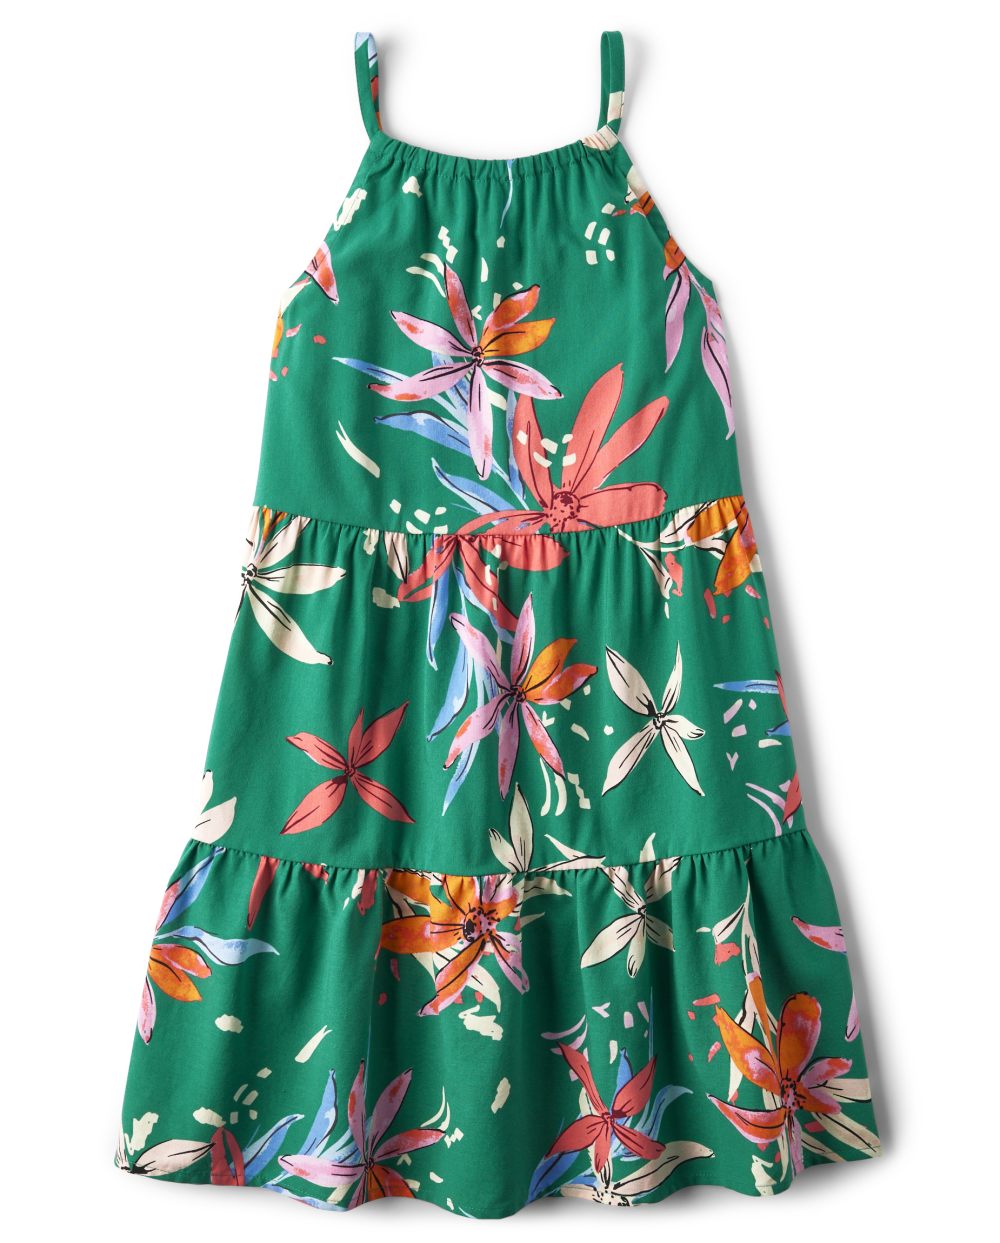 Girls Floral Tropical Print Tiered Sleeveless Halter Above the Knee Dress